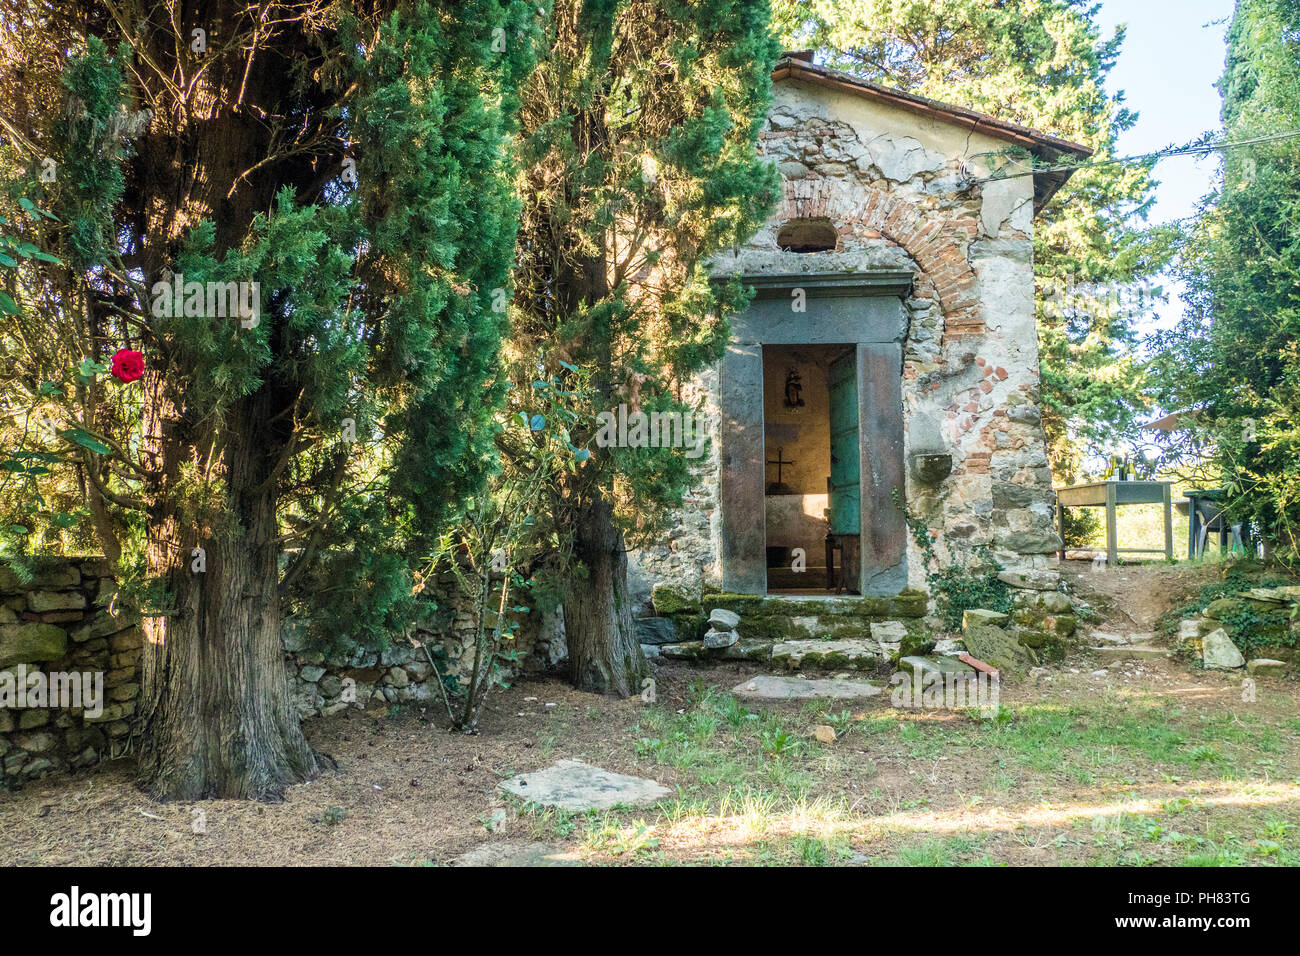 Garden Chapel at a farmhouse in the town of Borgo a Mozzano in the Lucca province of Tuscany, Italy Stock Photo